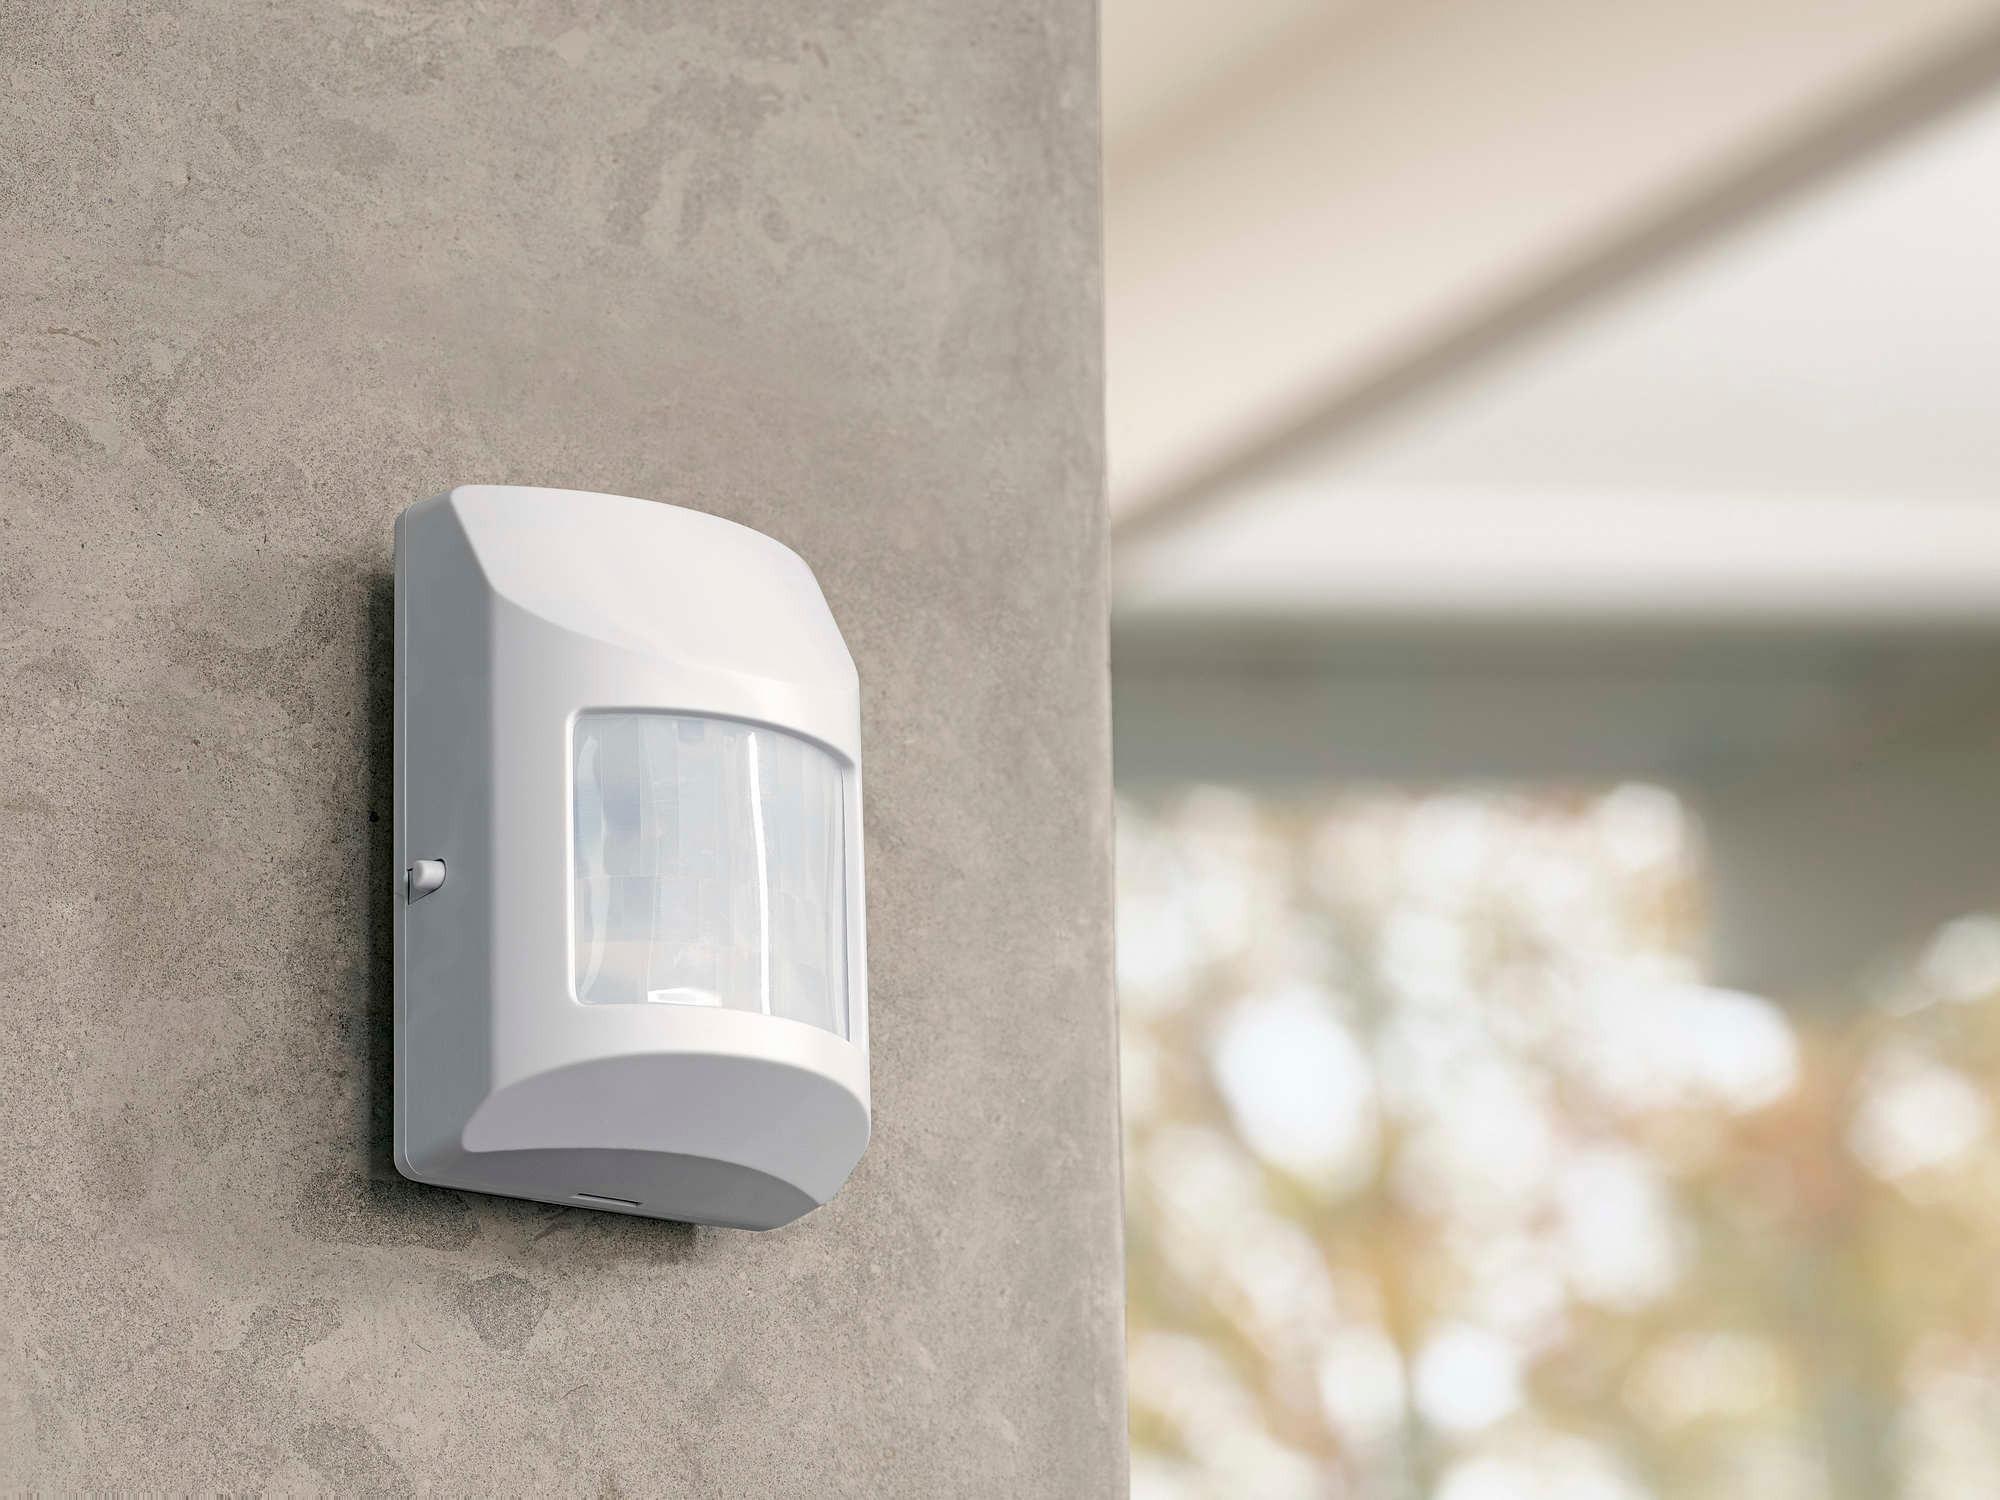 How Can I Verify The Functionality Of My ADT Motion Detector